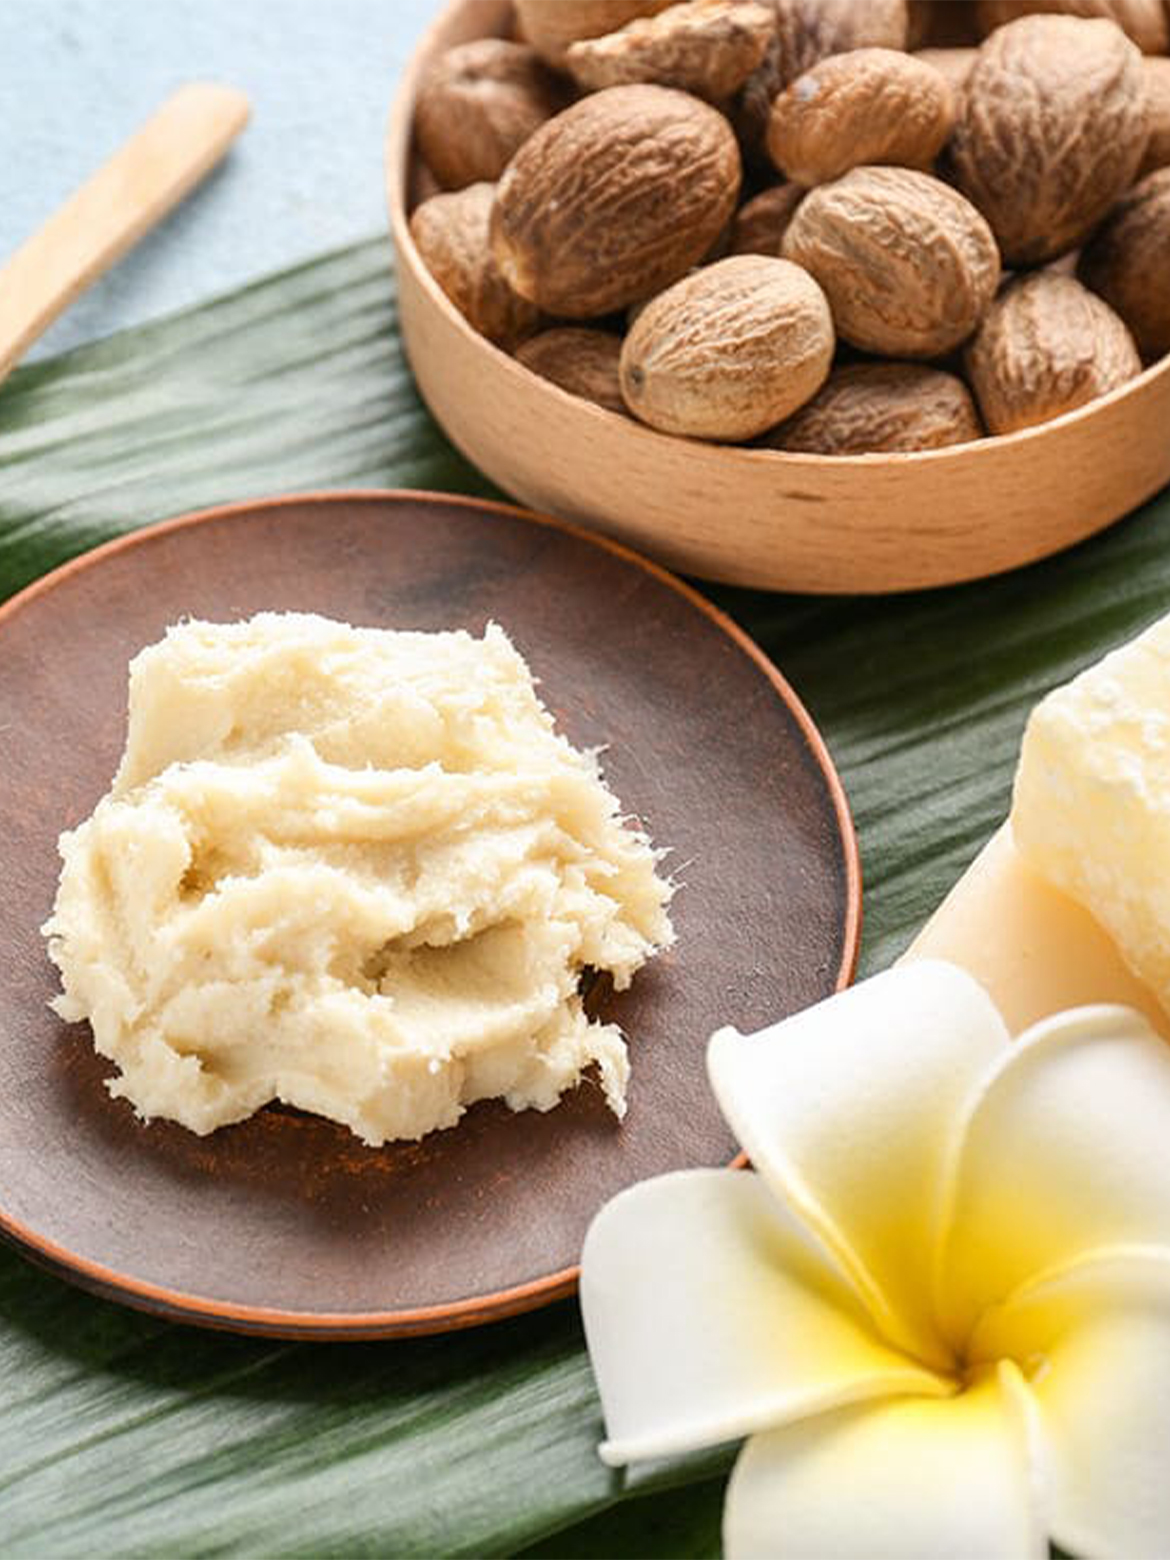 Benefits Of Shea Butter For Skin And Hair - SUGAR Cosmetics